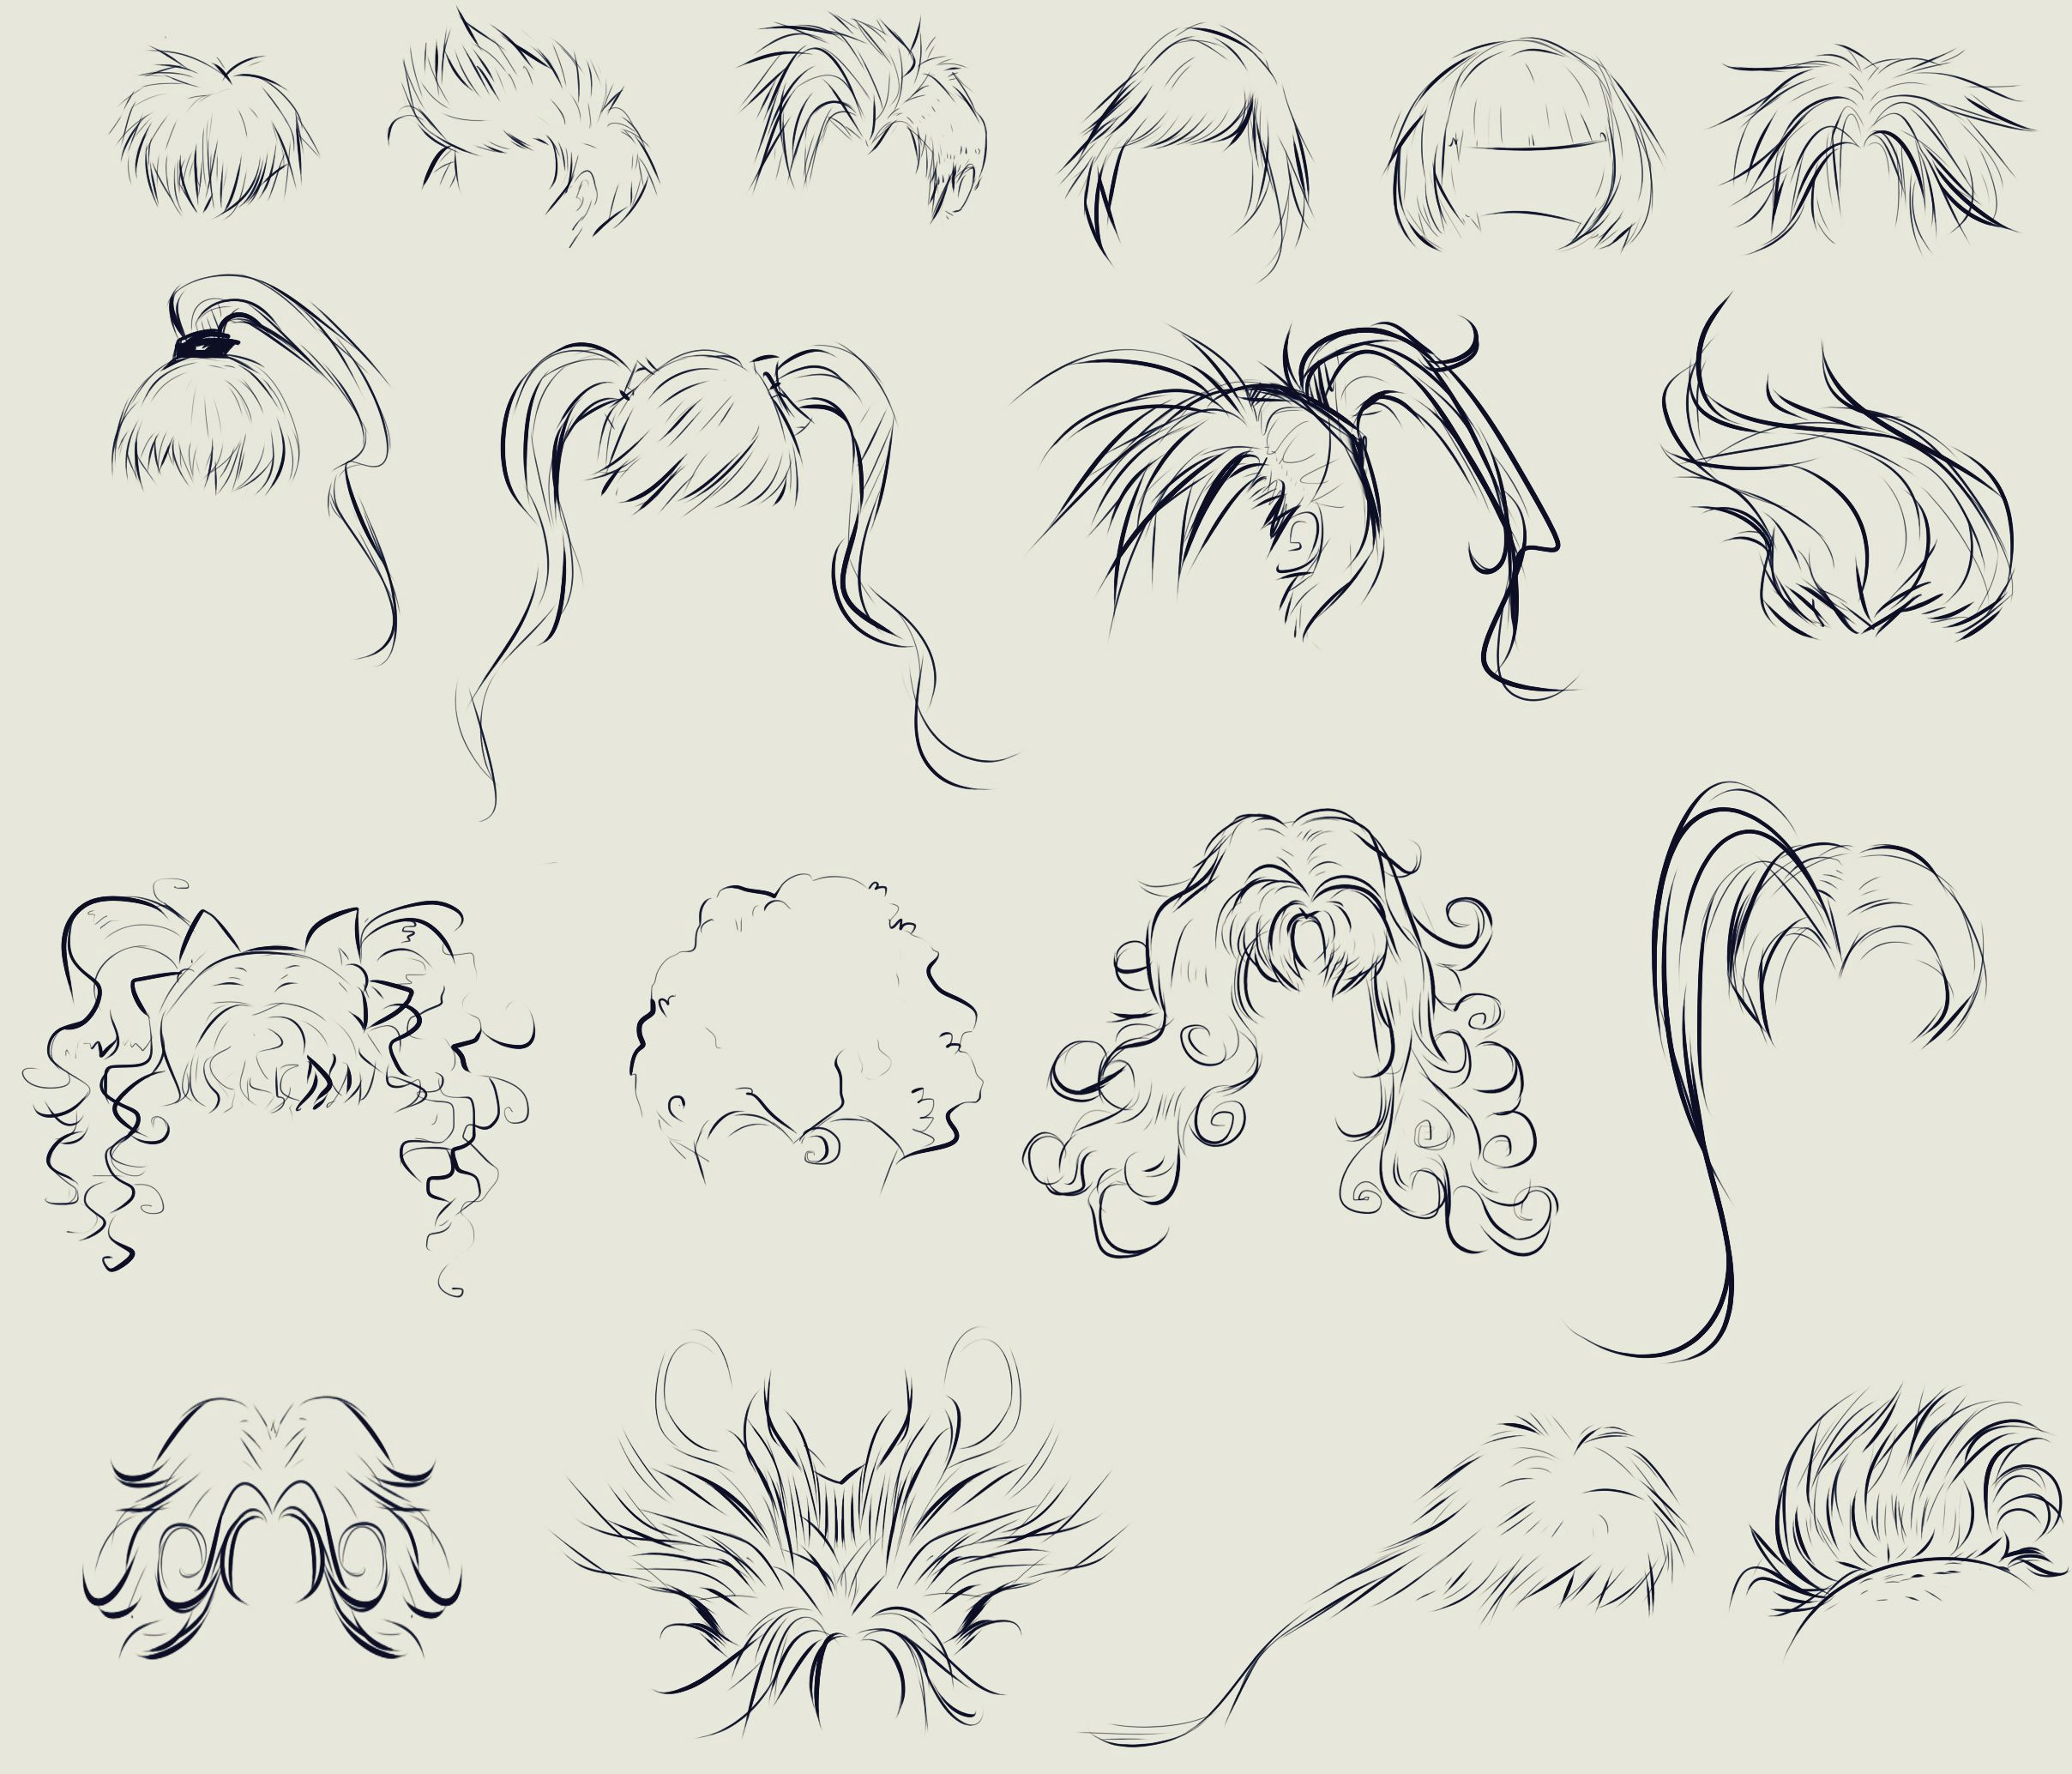 Drawing Related Anime This Anime Hair Reference Sheet by Ryky is All You Need to Get Those